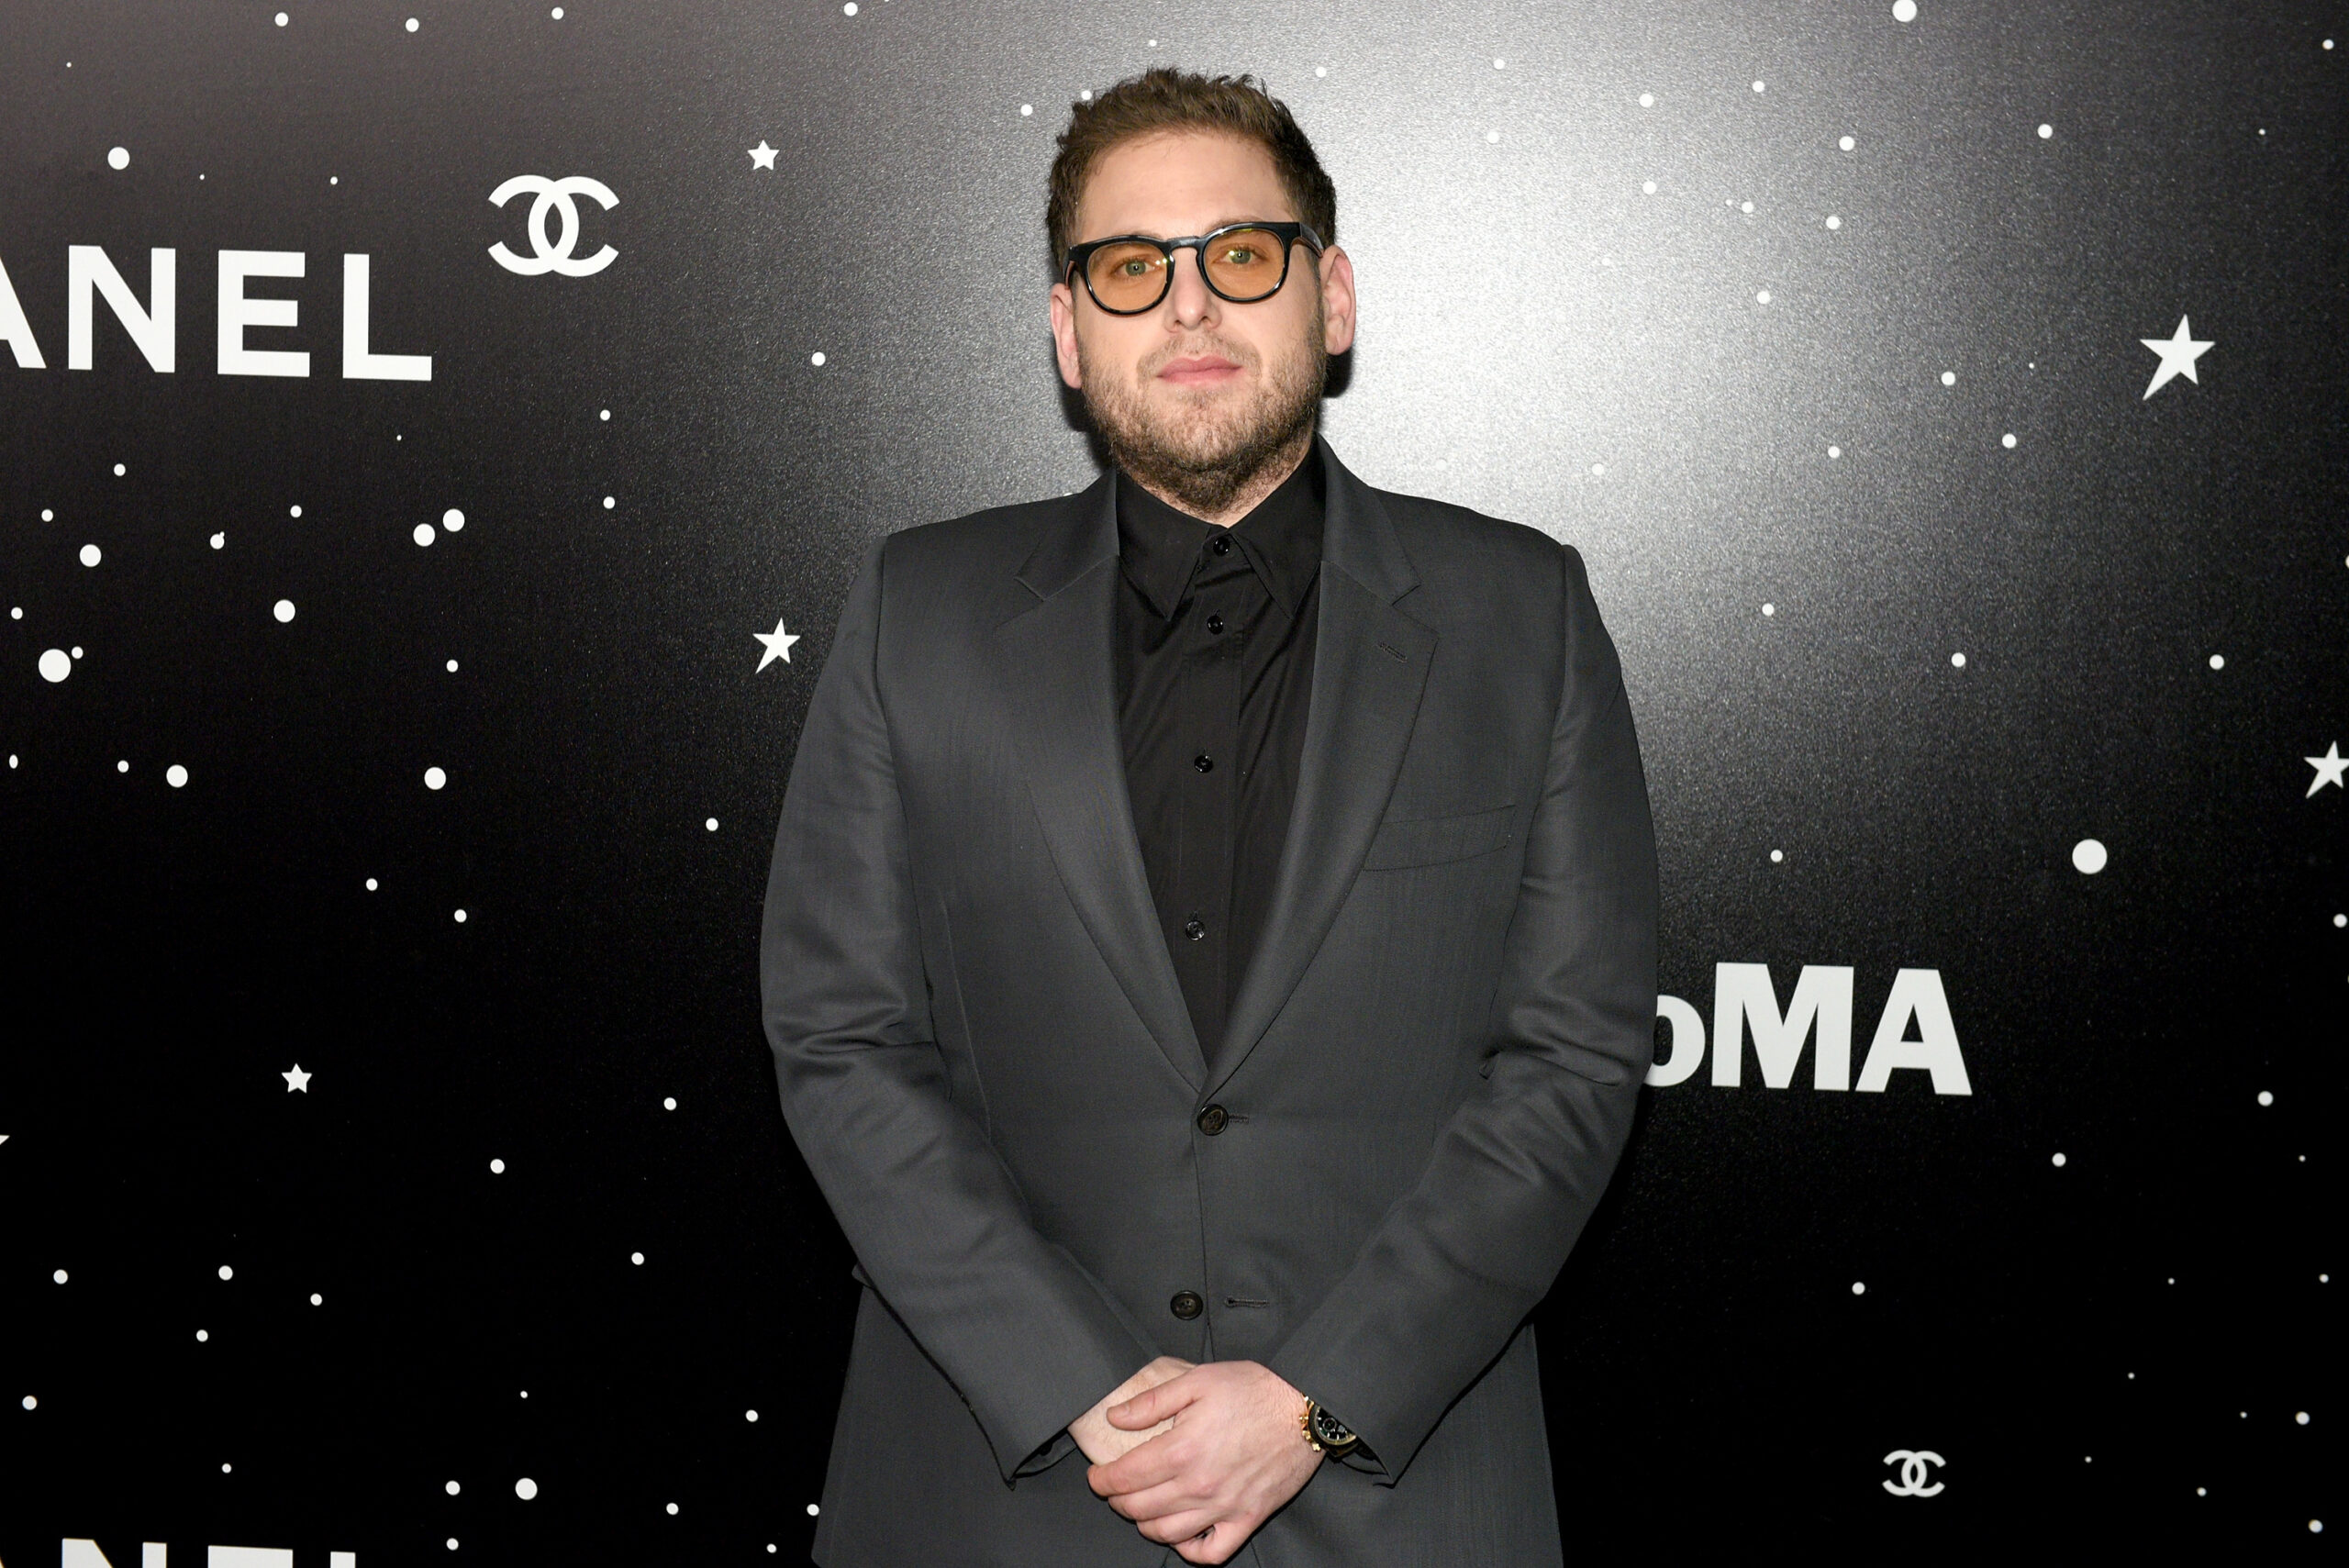 Jonah Hill Reveals Slim Appearance Following Emotional Abuse Allegations